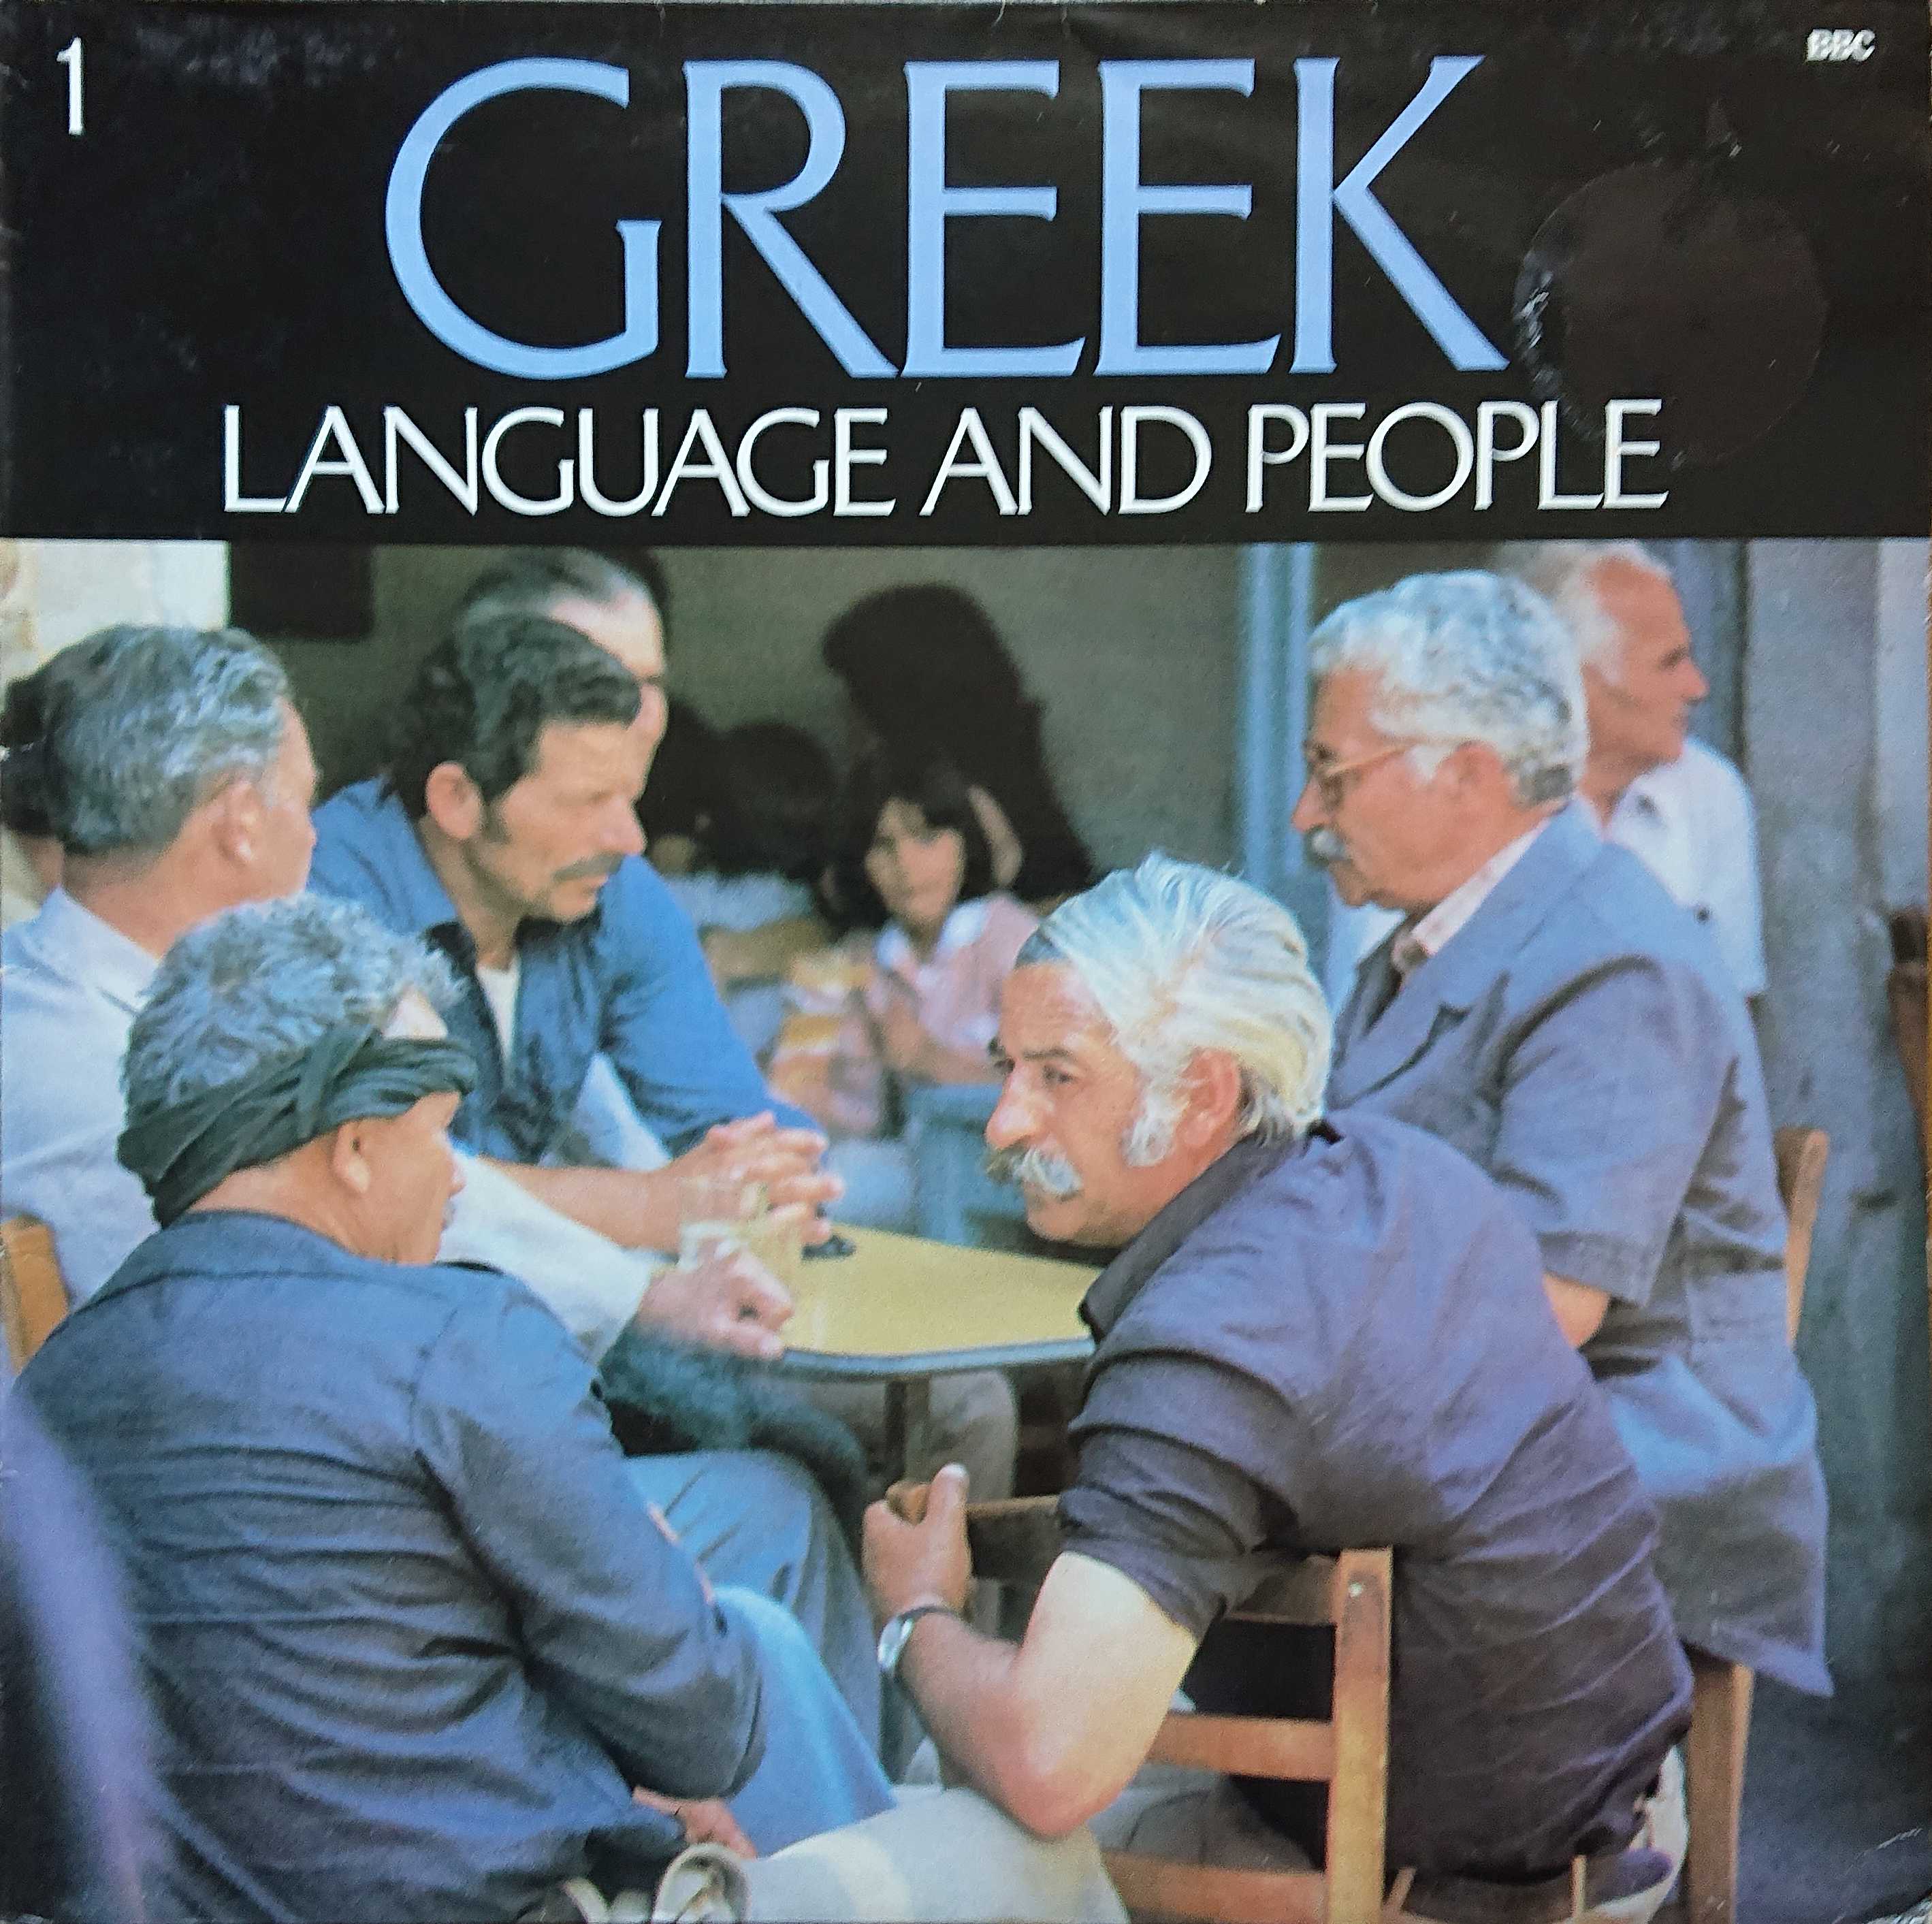 Picture of OP 269 Greek language and people by artist David A. Hardy from the BBC records and Tapes library